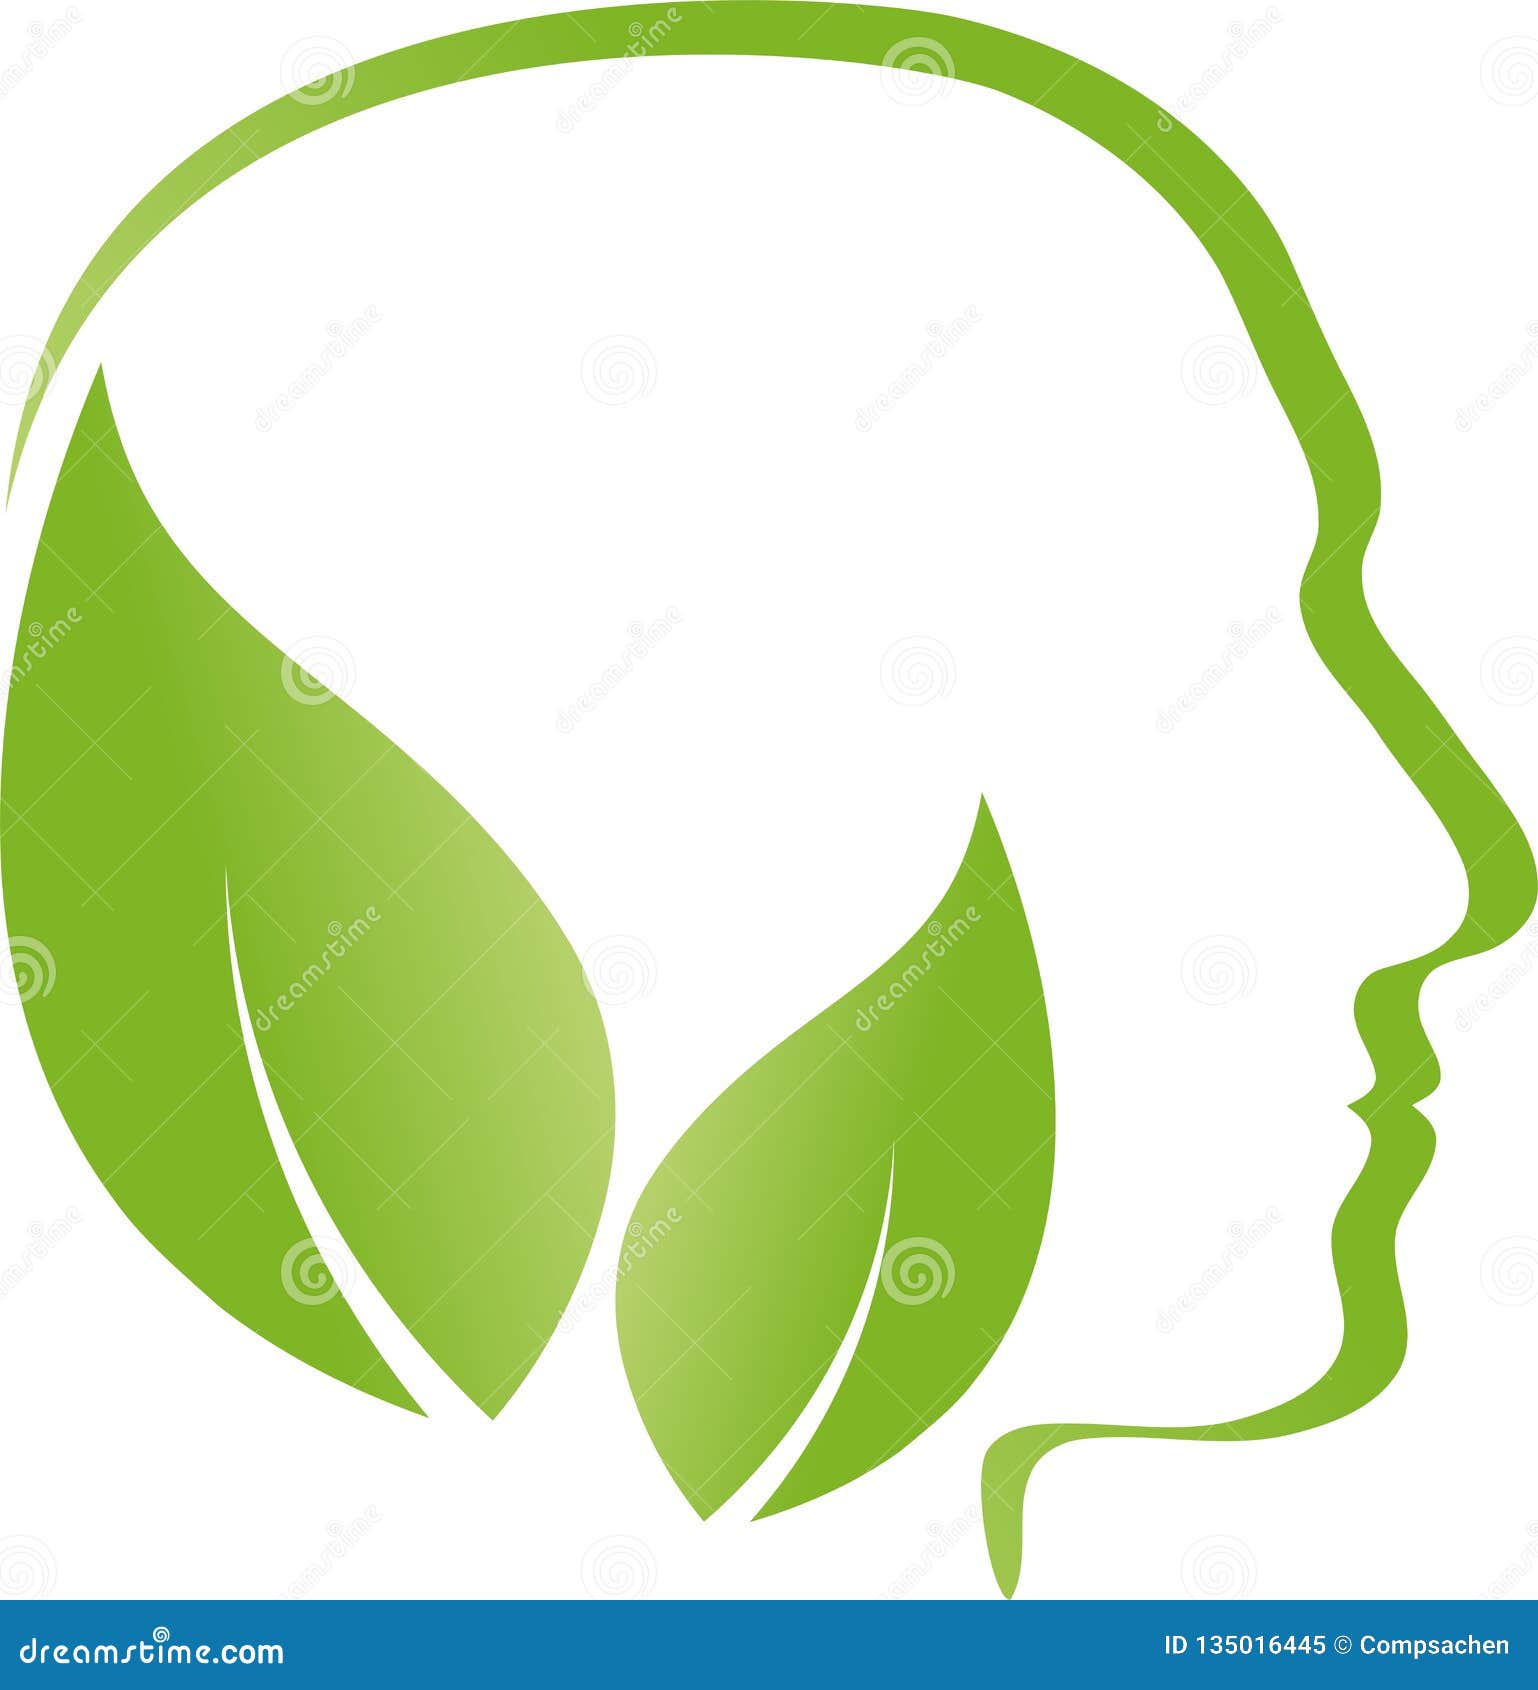 head, face and leaves, alternative practitioner and human logo